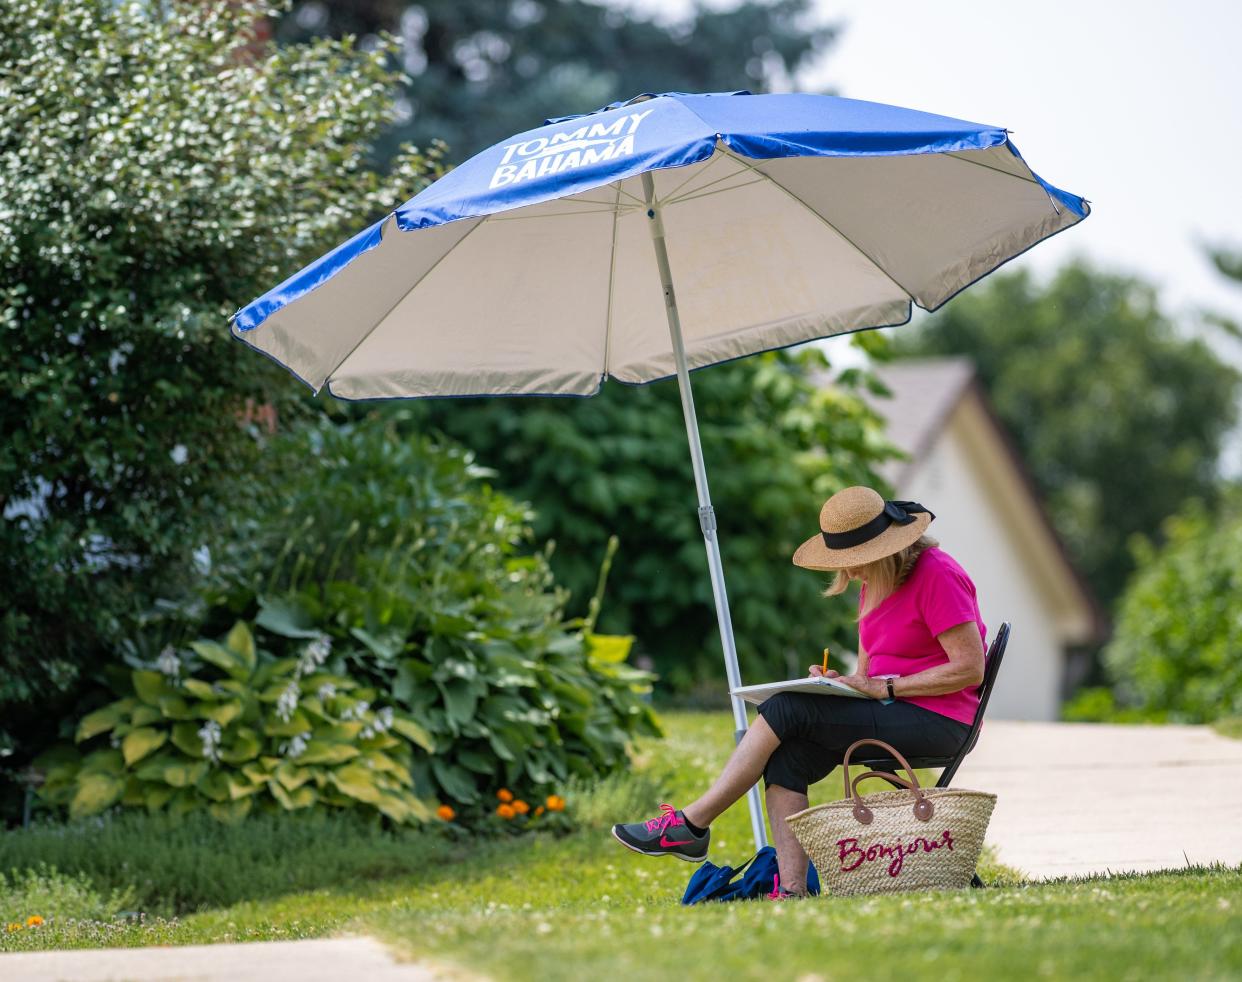 Carrie Nocera of Pickerington sketches a watercolor painting as part of Central Ohio Plein Air members creating plein air art June 25 at the Gardens at Gantz Farm in Grove City.